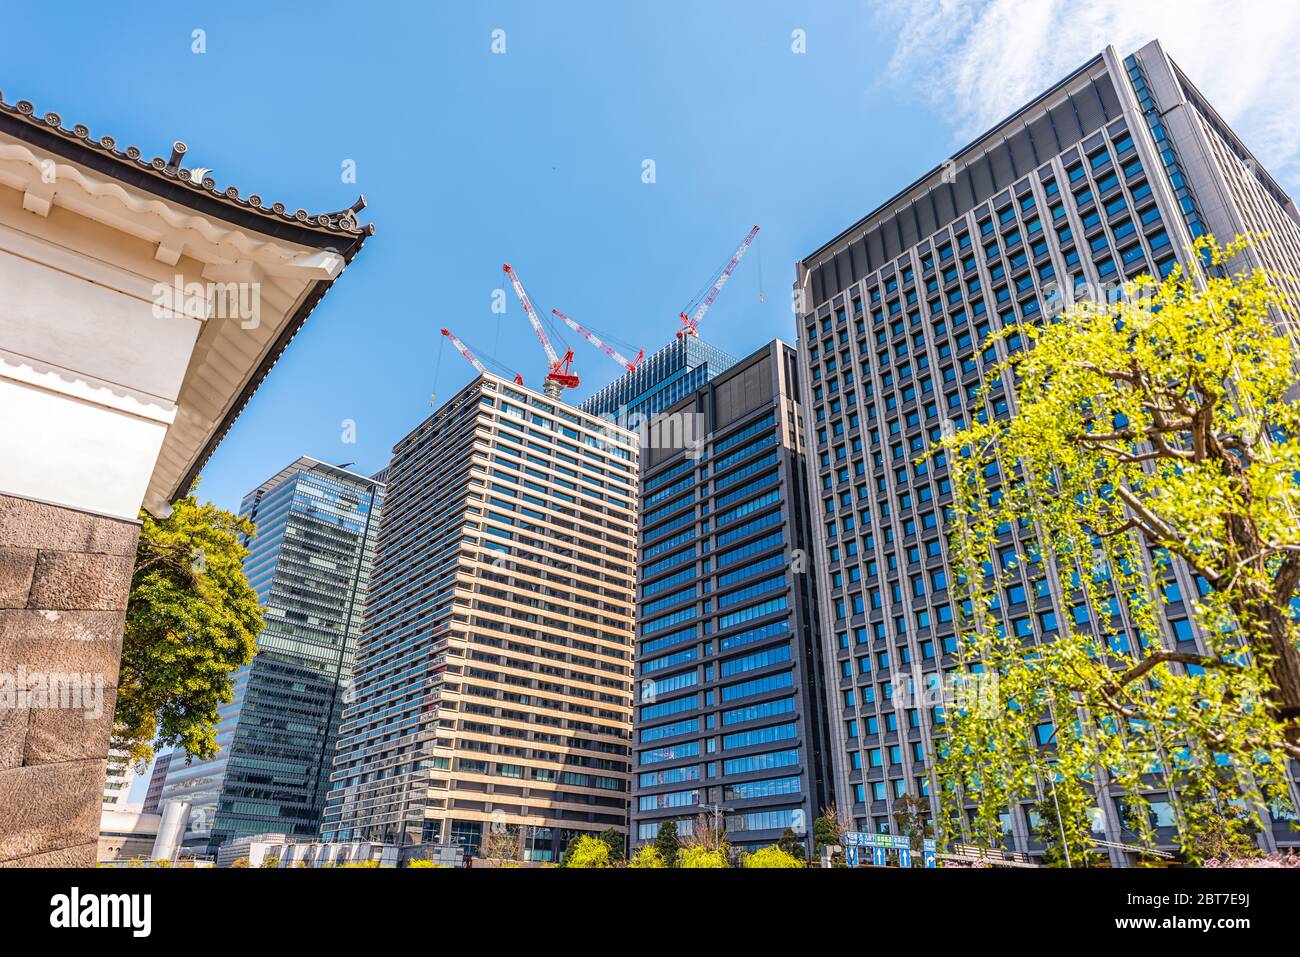 Tokyo, Japan - April 1, 2019: Moat surrounding wall by Imperial palace during spring day with cityscape skyscrapers in downtown park construction cran Stock Photo